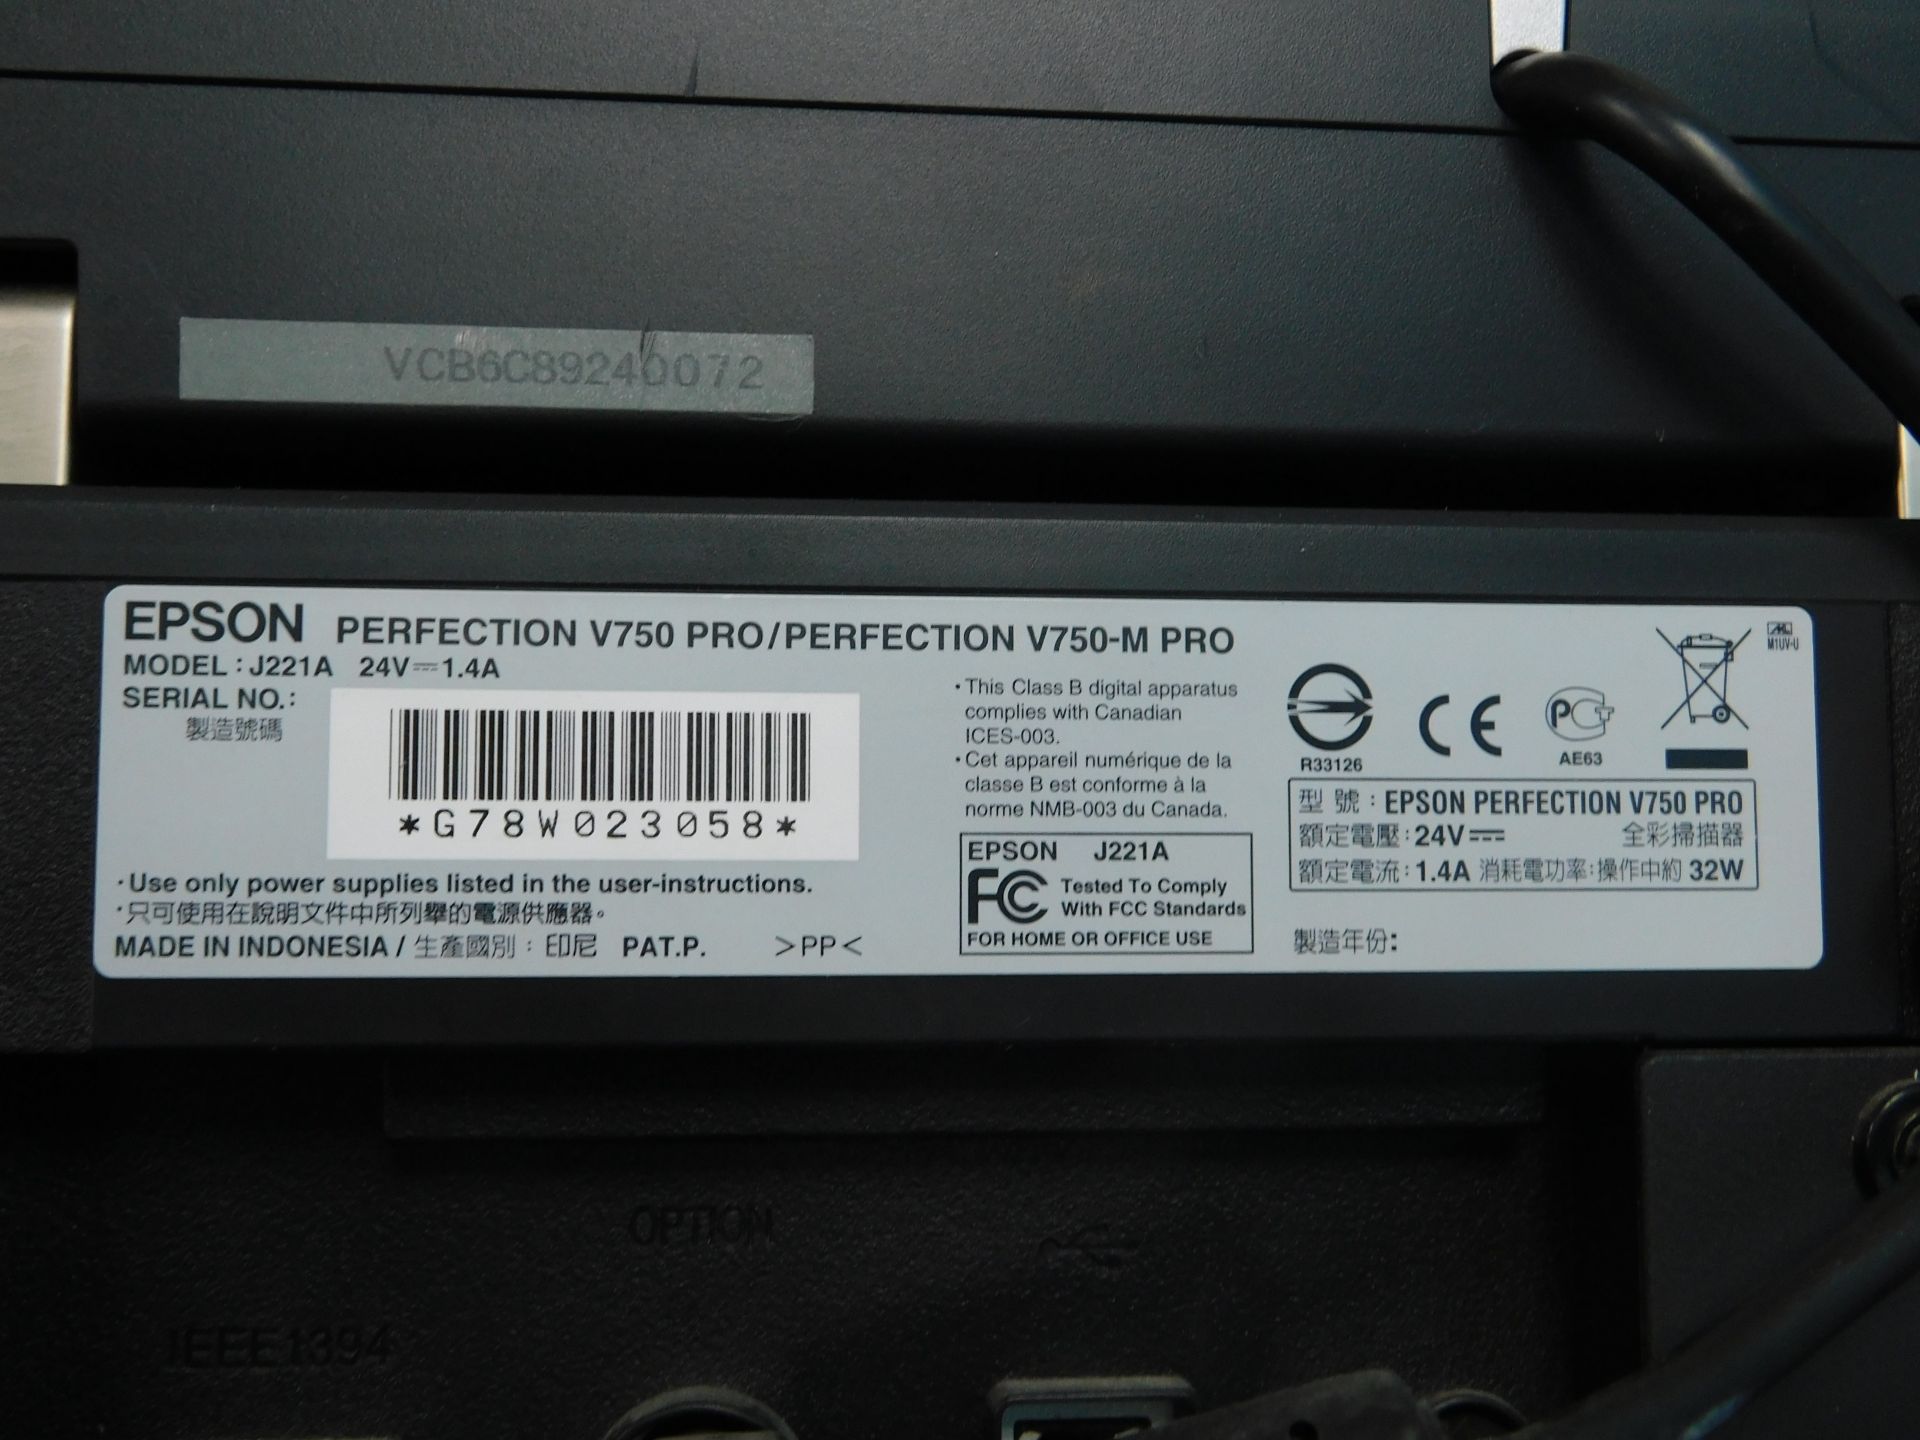 Epson Perfect V750 Pro Photo Scanner, Serial Number G78W023058 (Location: Hatfield - See General - Image 2 of 2